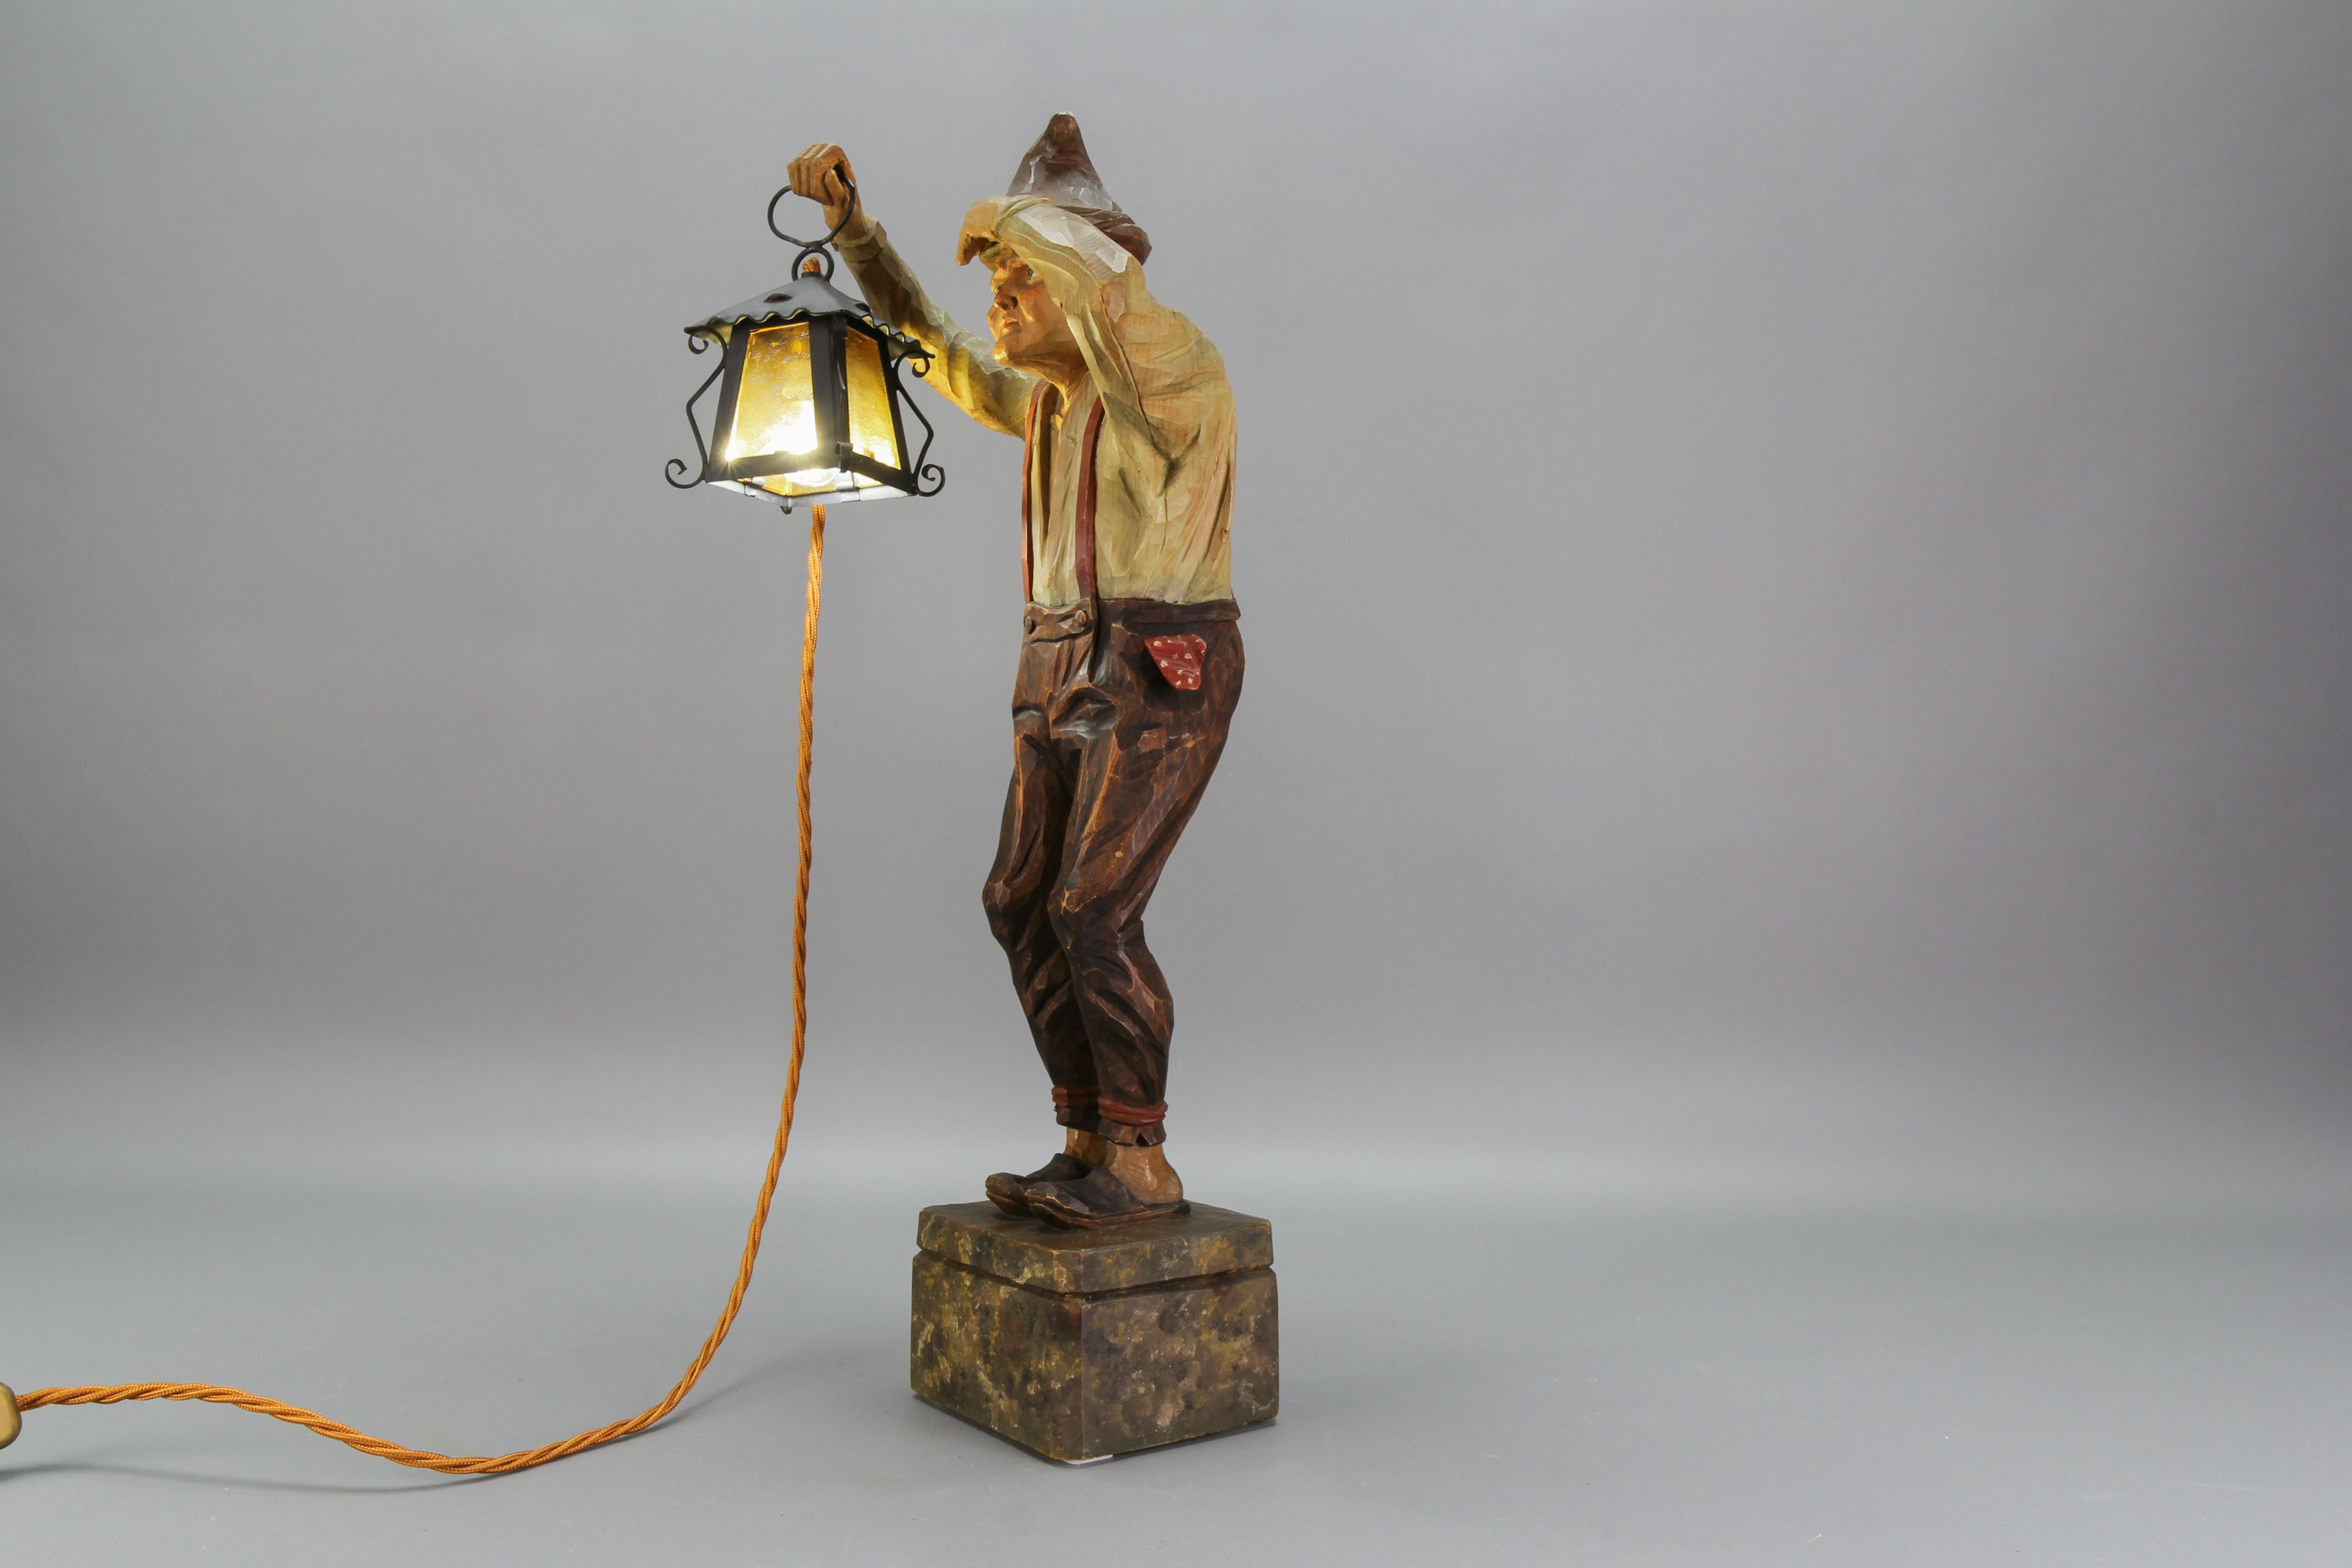 Large Hand-Carved Wooden Lamp Sculpture Man with a Lantern, Germany, 1930s For Sale 8